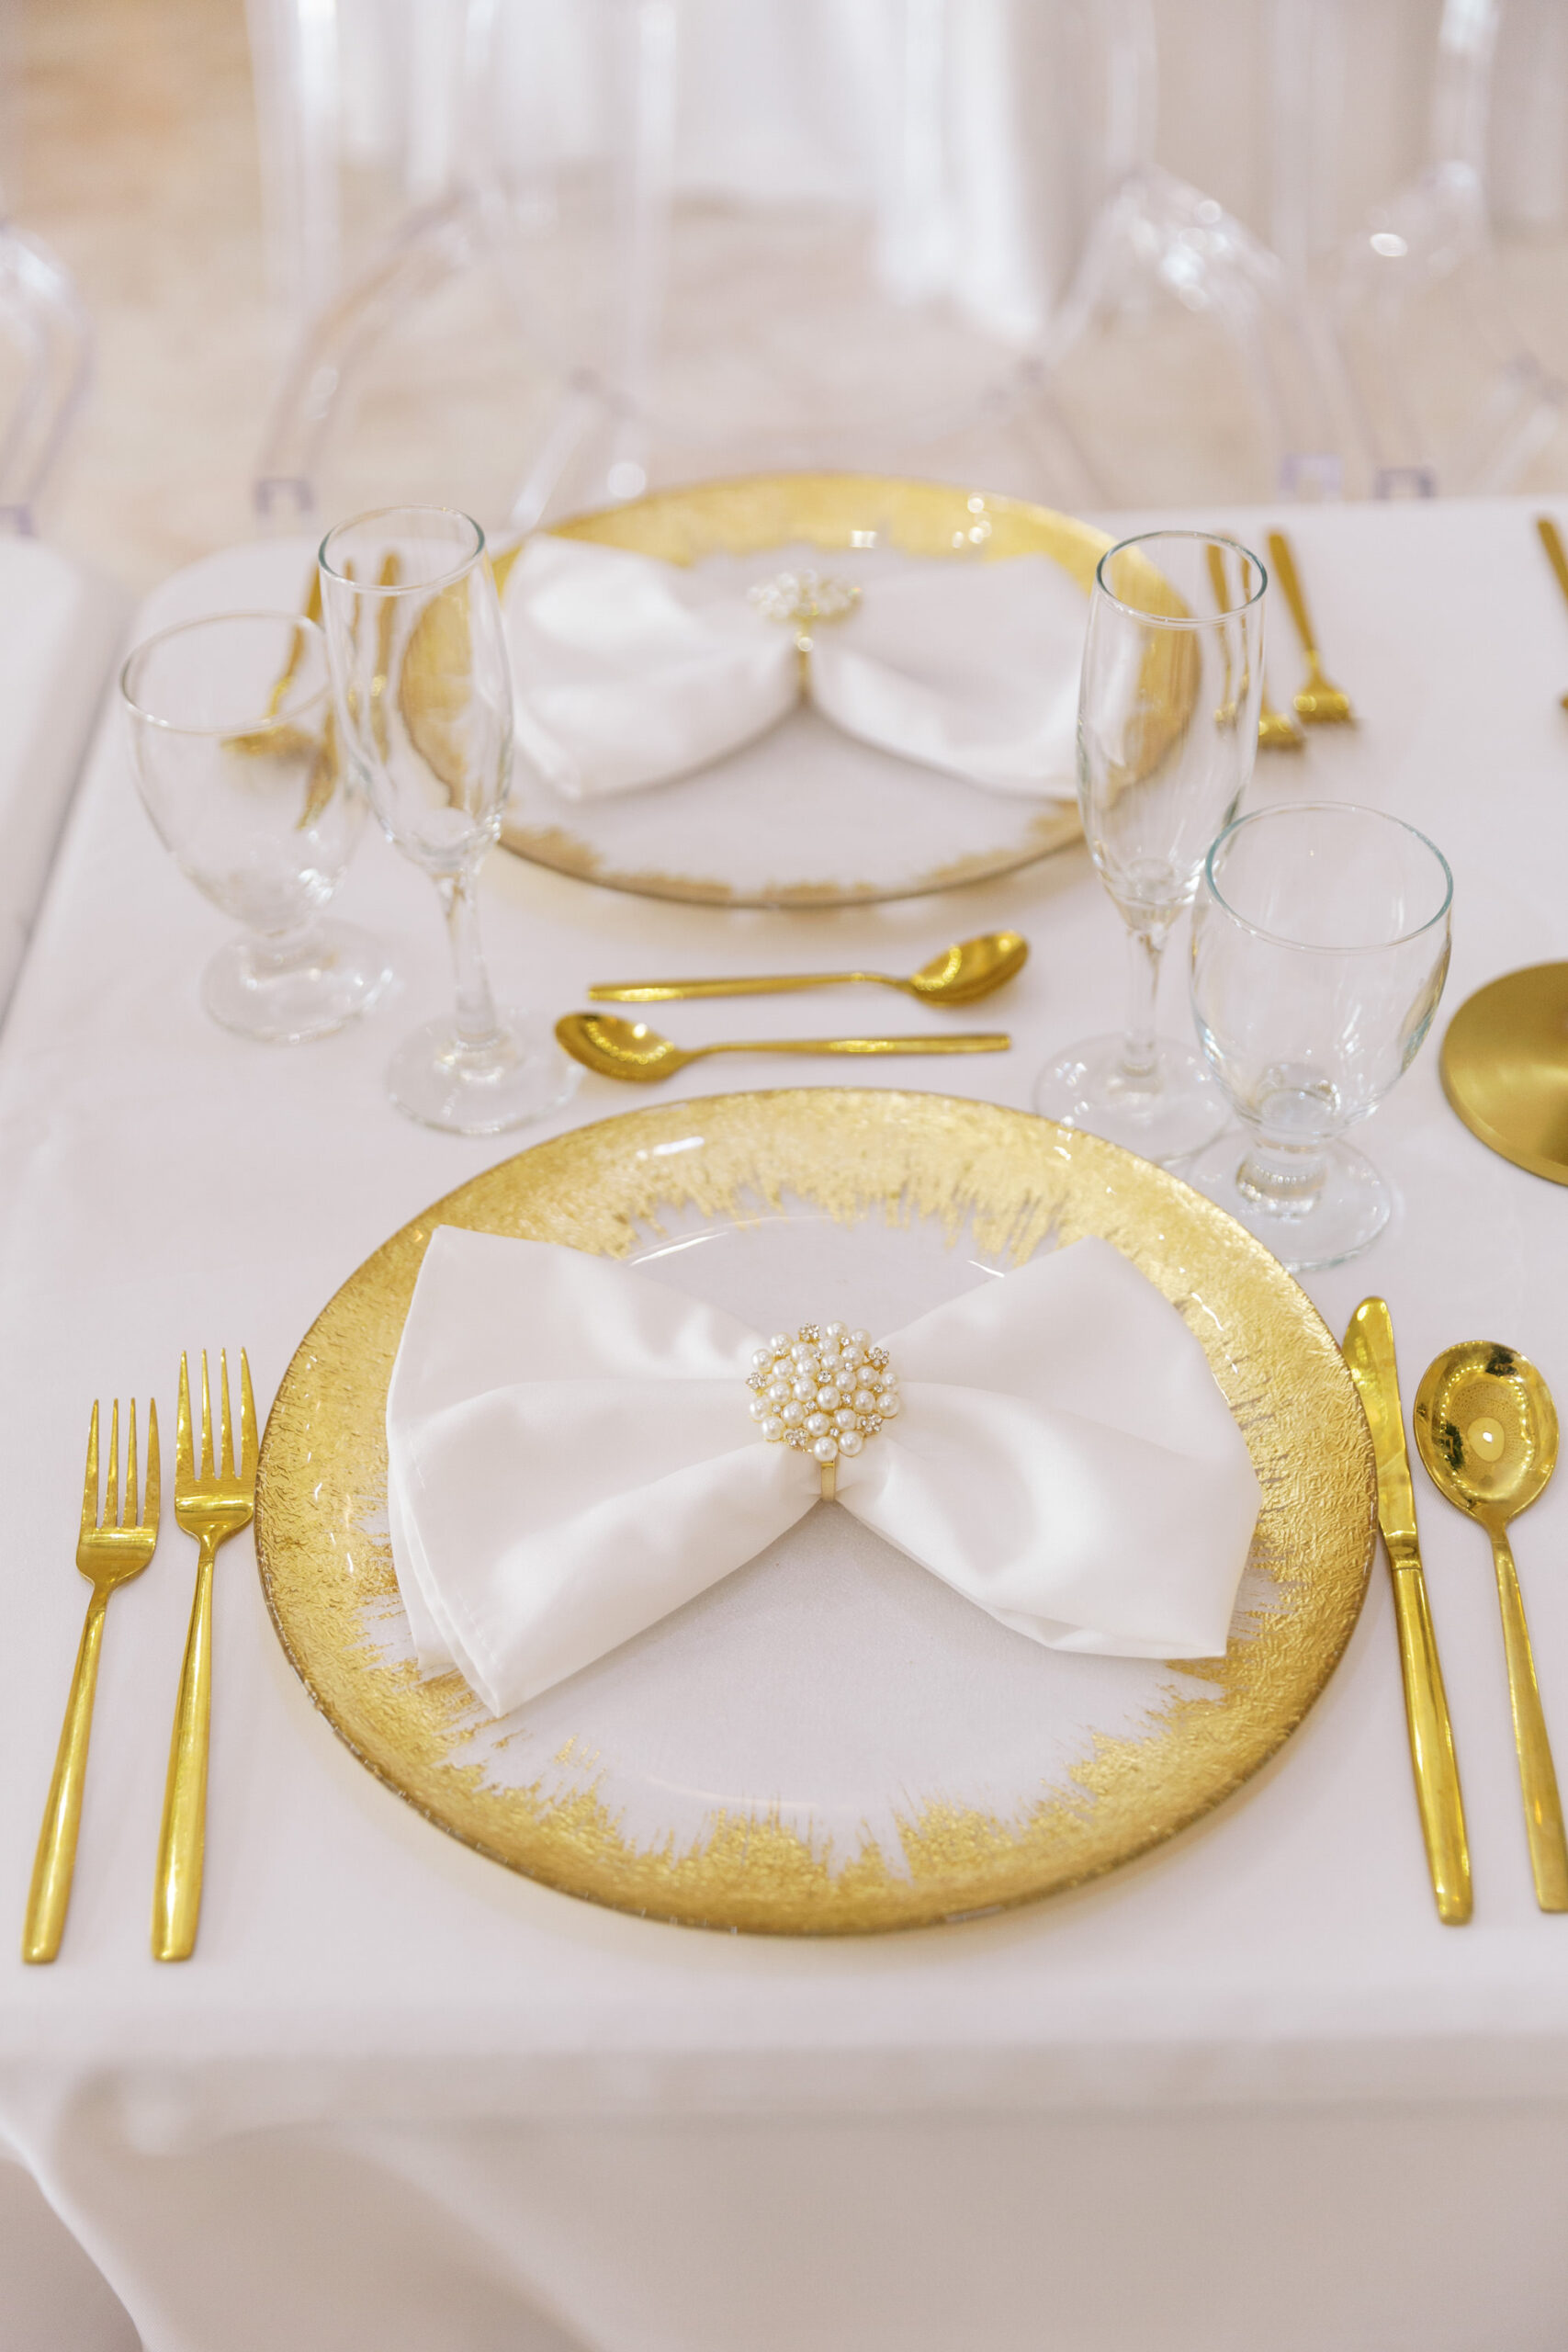 Vintage Old Hollywood Gatsby Inspired Wedding Reception Decor, Table Setting with Gold Chargers and Flatware, White Linens | Tampa Bay Rentals Gabro Event Services